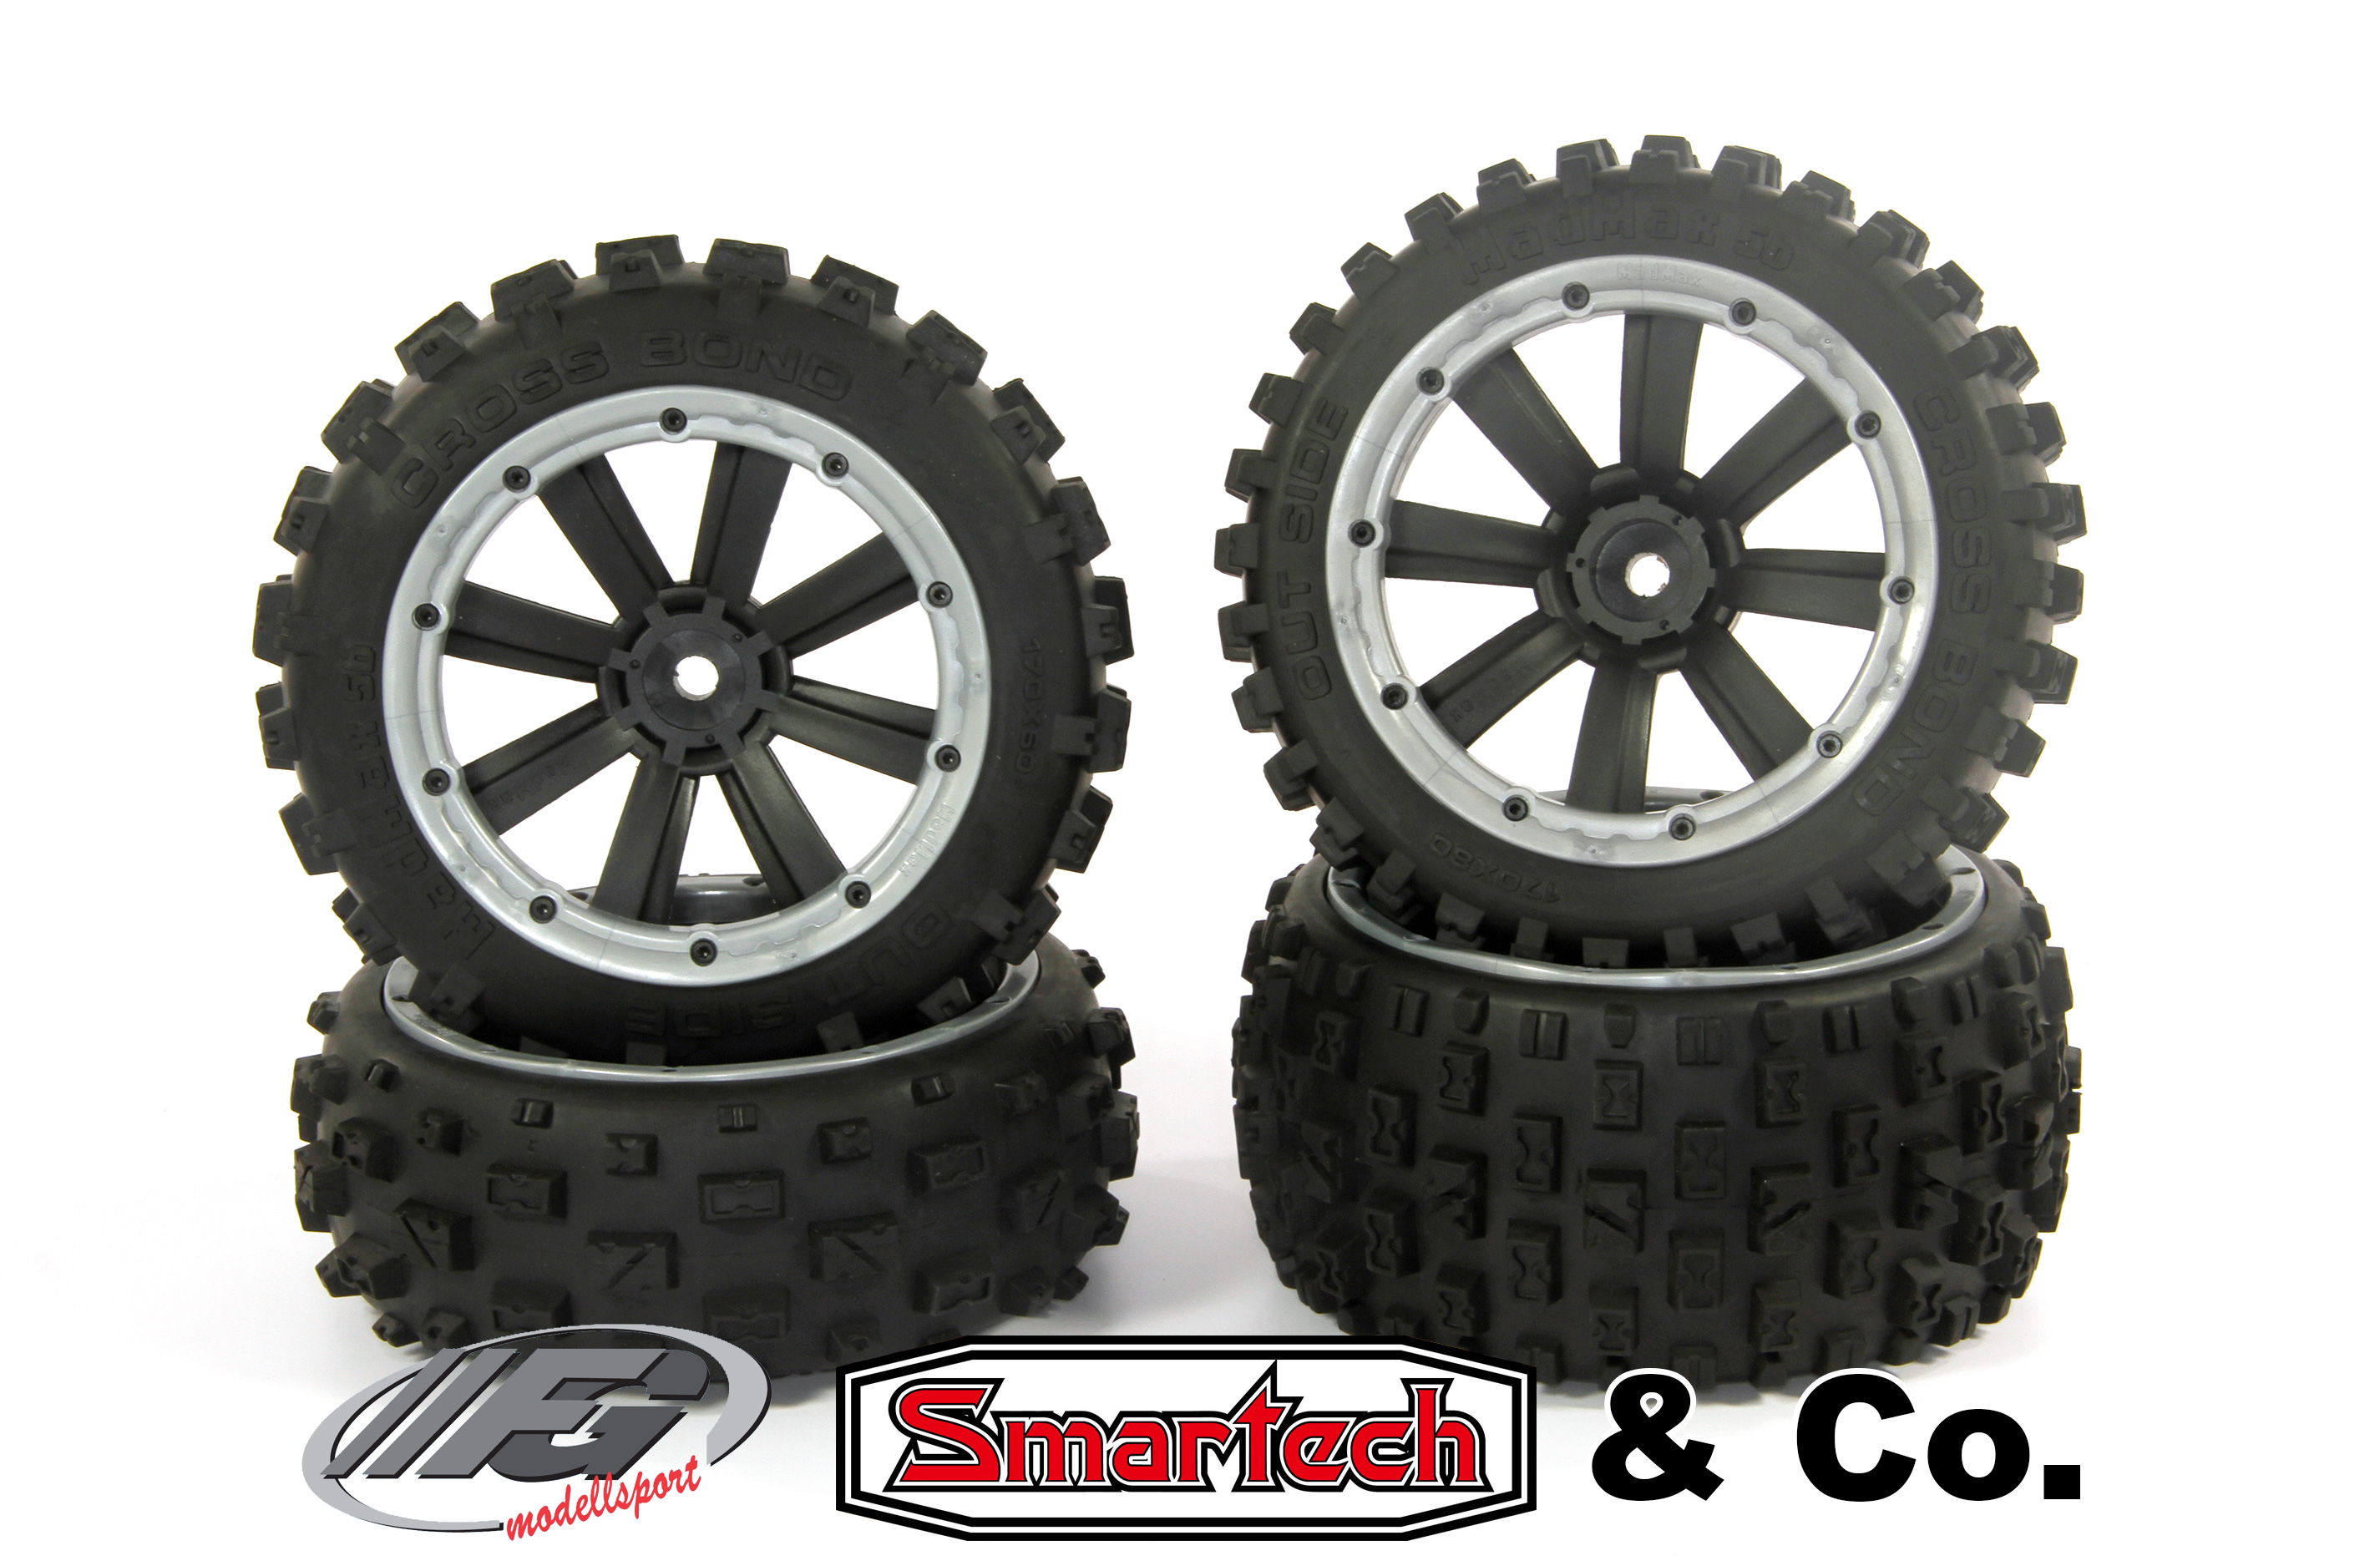 y1402/01 MadMax CROSS BOND 170x80/x60 tires for FG/Smartech and other (18 mm square drive)